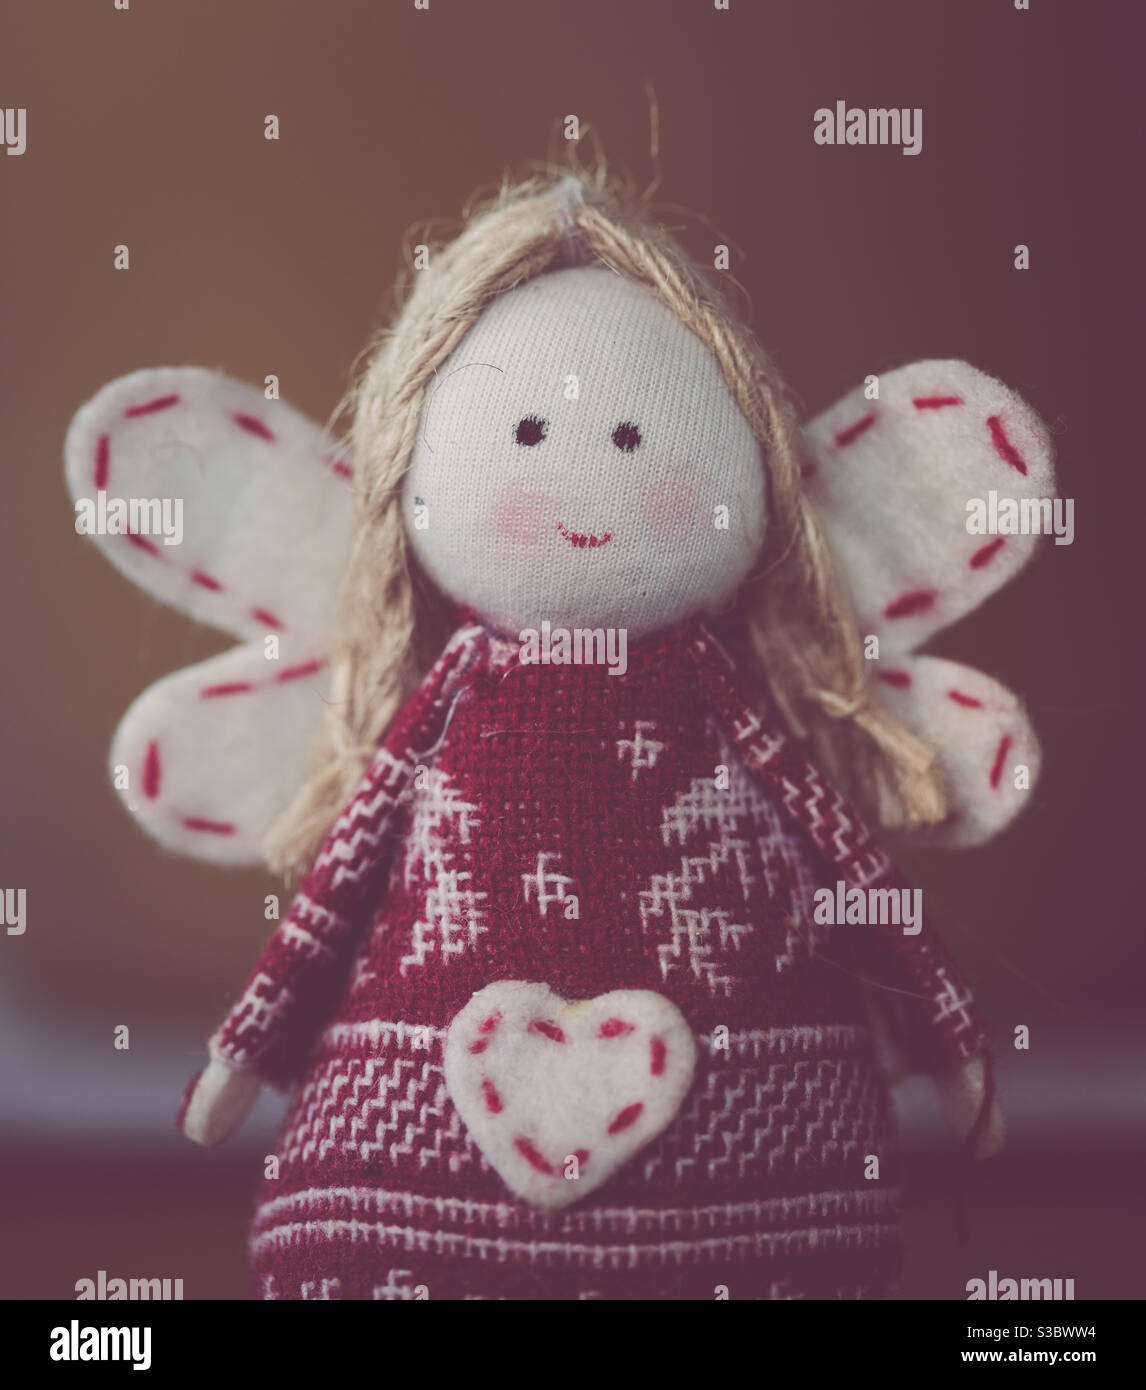 A cuddly toy angel with happy smiling face and loving heart Stock Photo